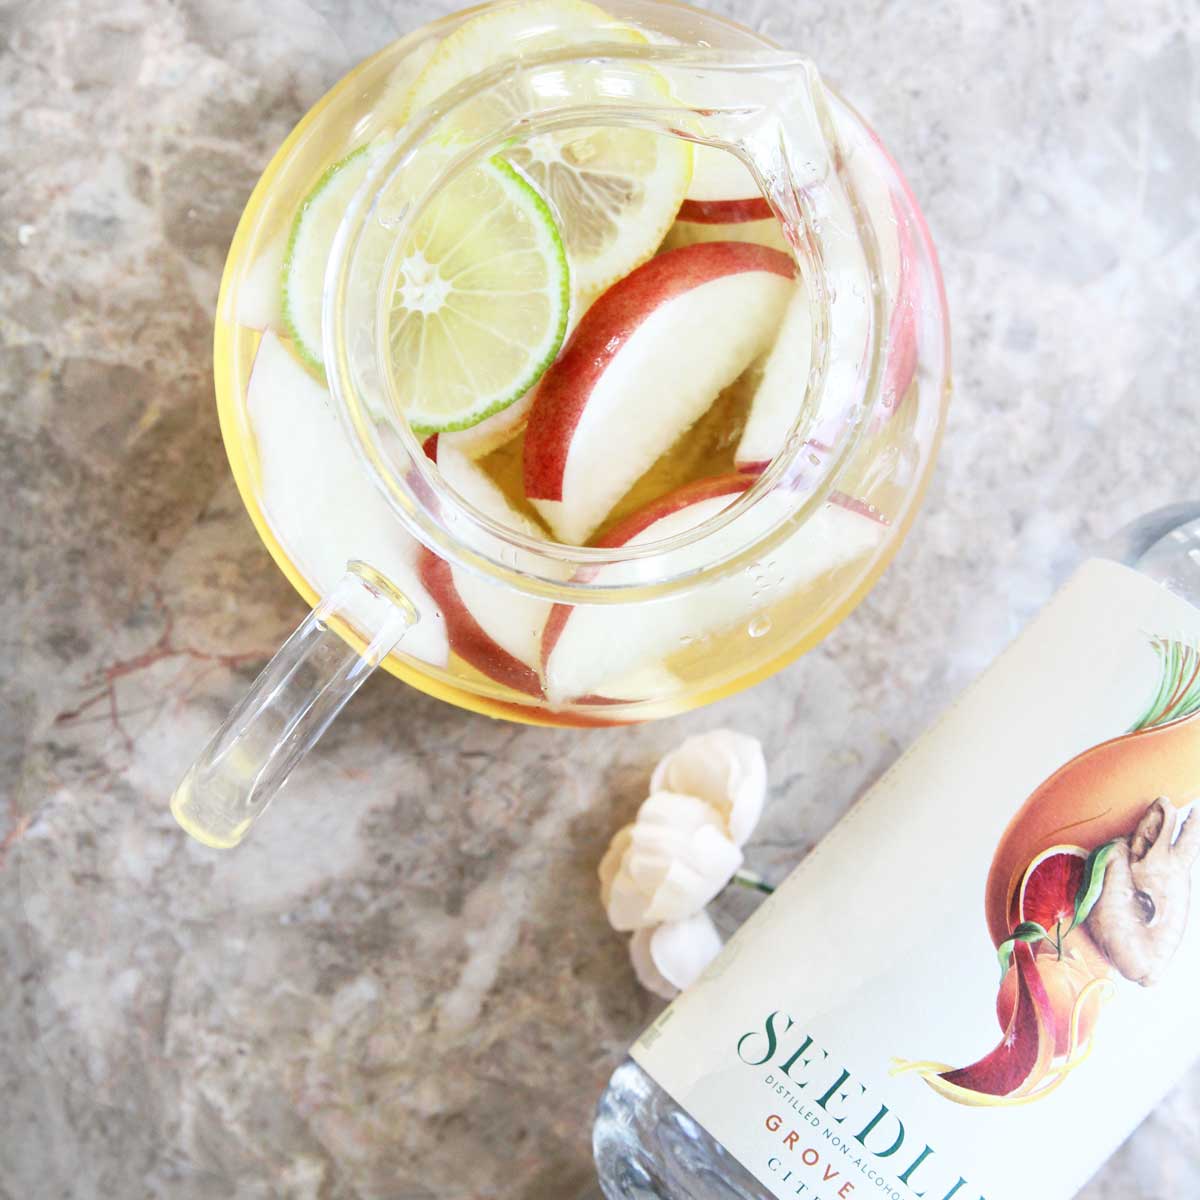 Non-Alcoholic White Sangria Made with Seedlip (Low Calorie) - Lemon Whipped Cream